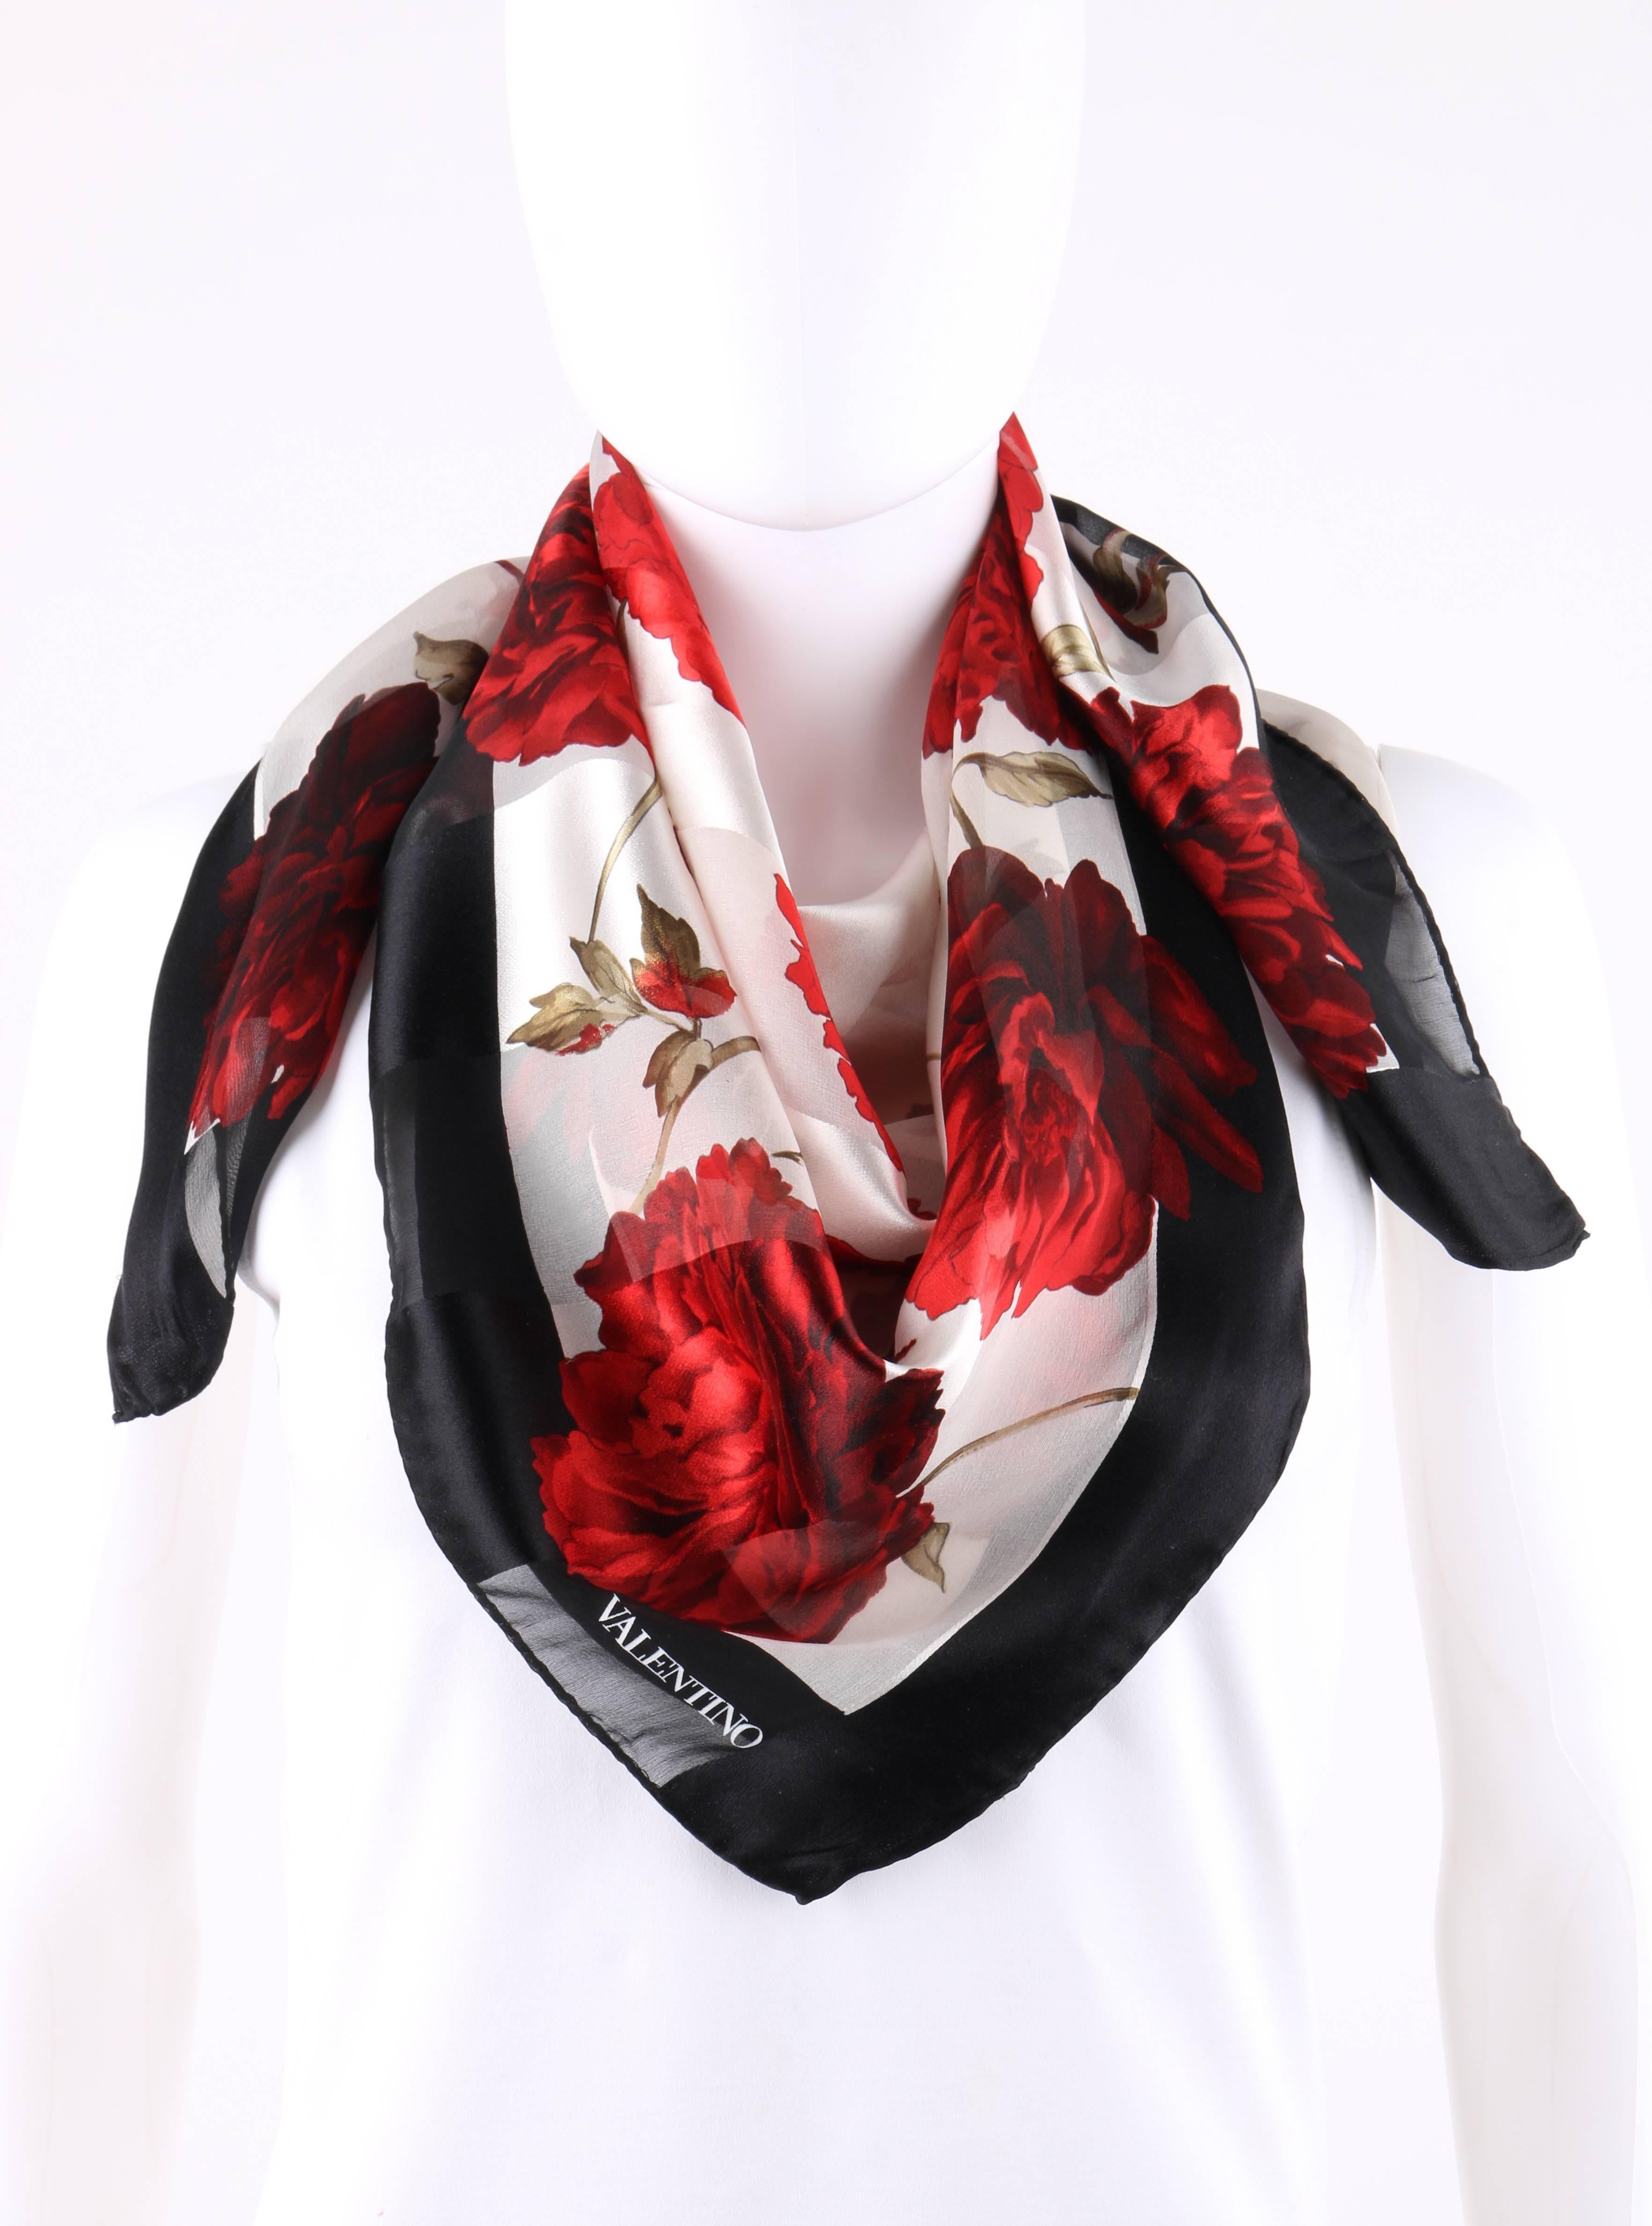 Valentino black and white rose floral print striped semi-sheer silk scarf. Black boarder. Winter white center with large red rose print throughout. Alternating stripes of sheer satin. 